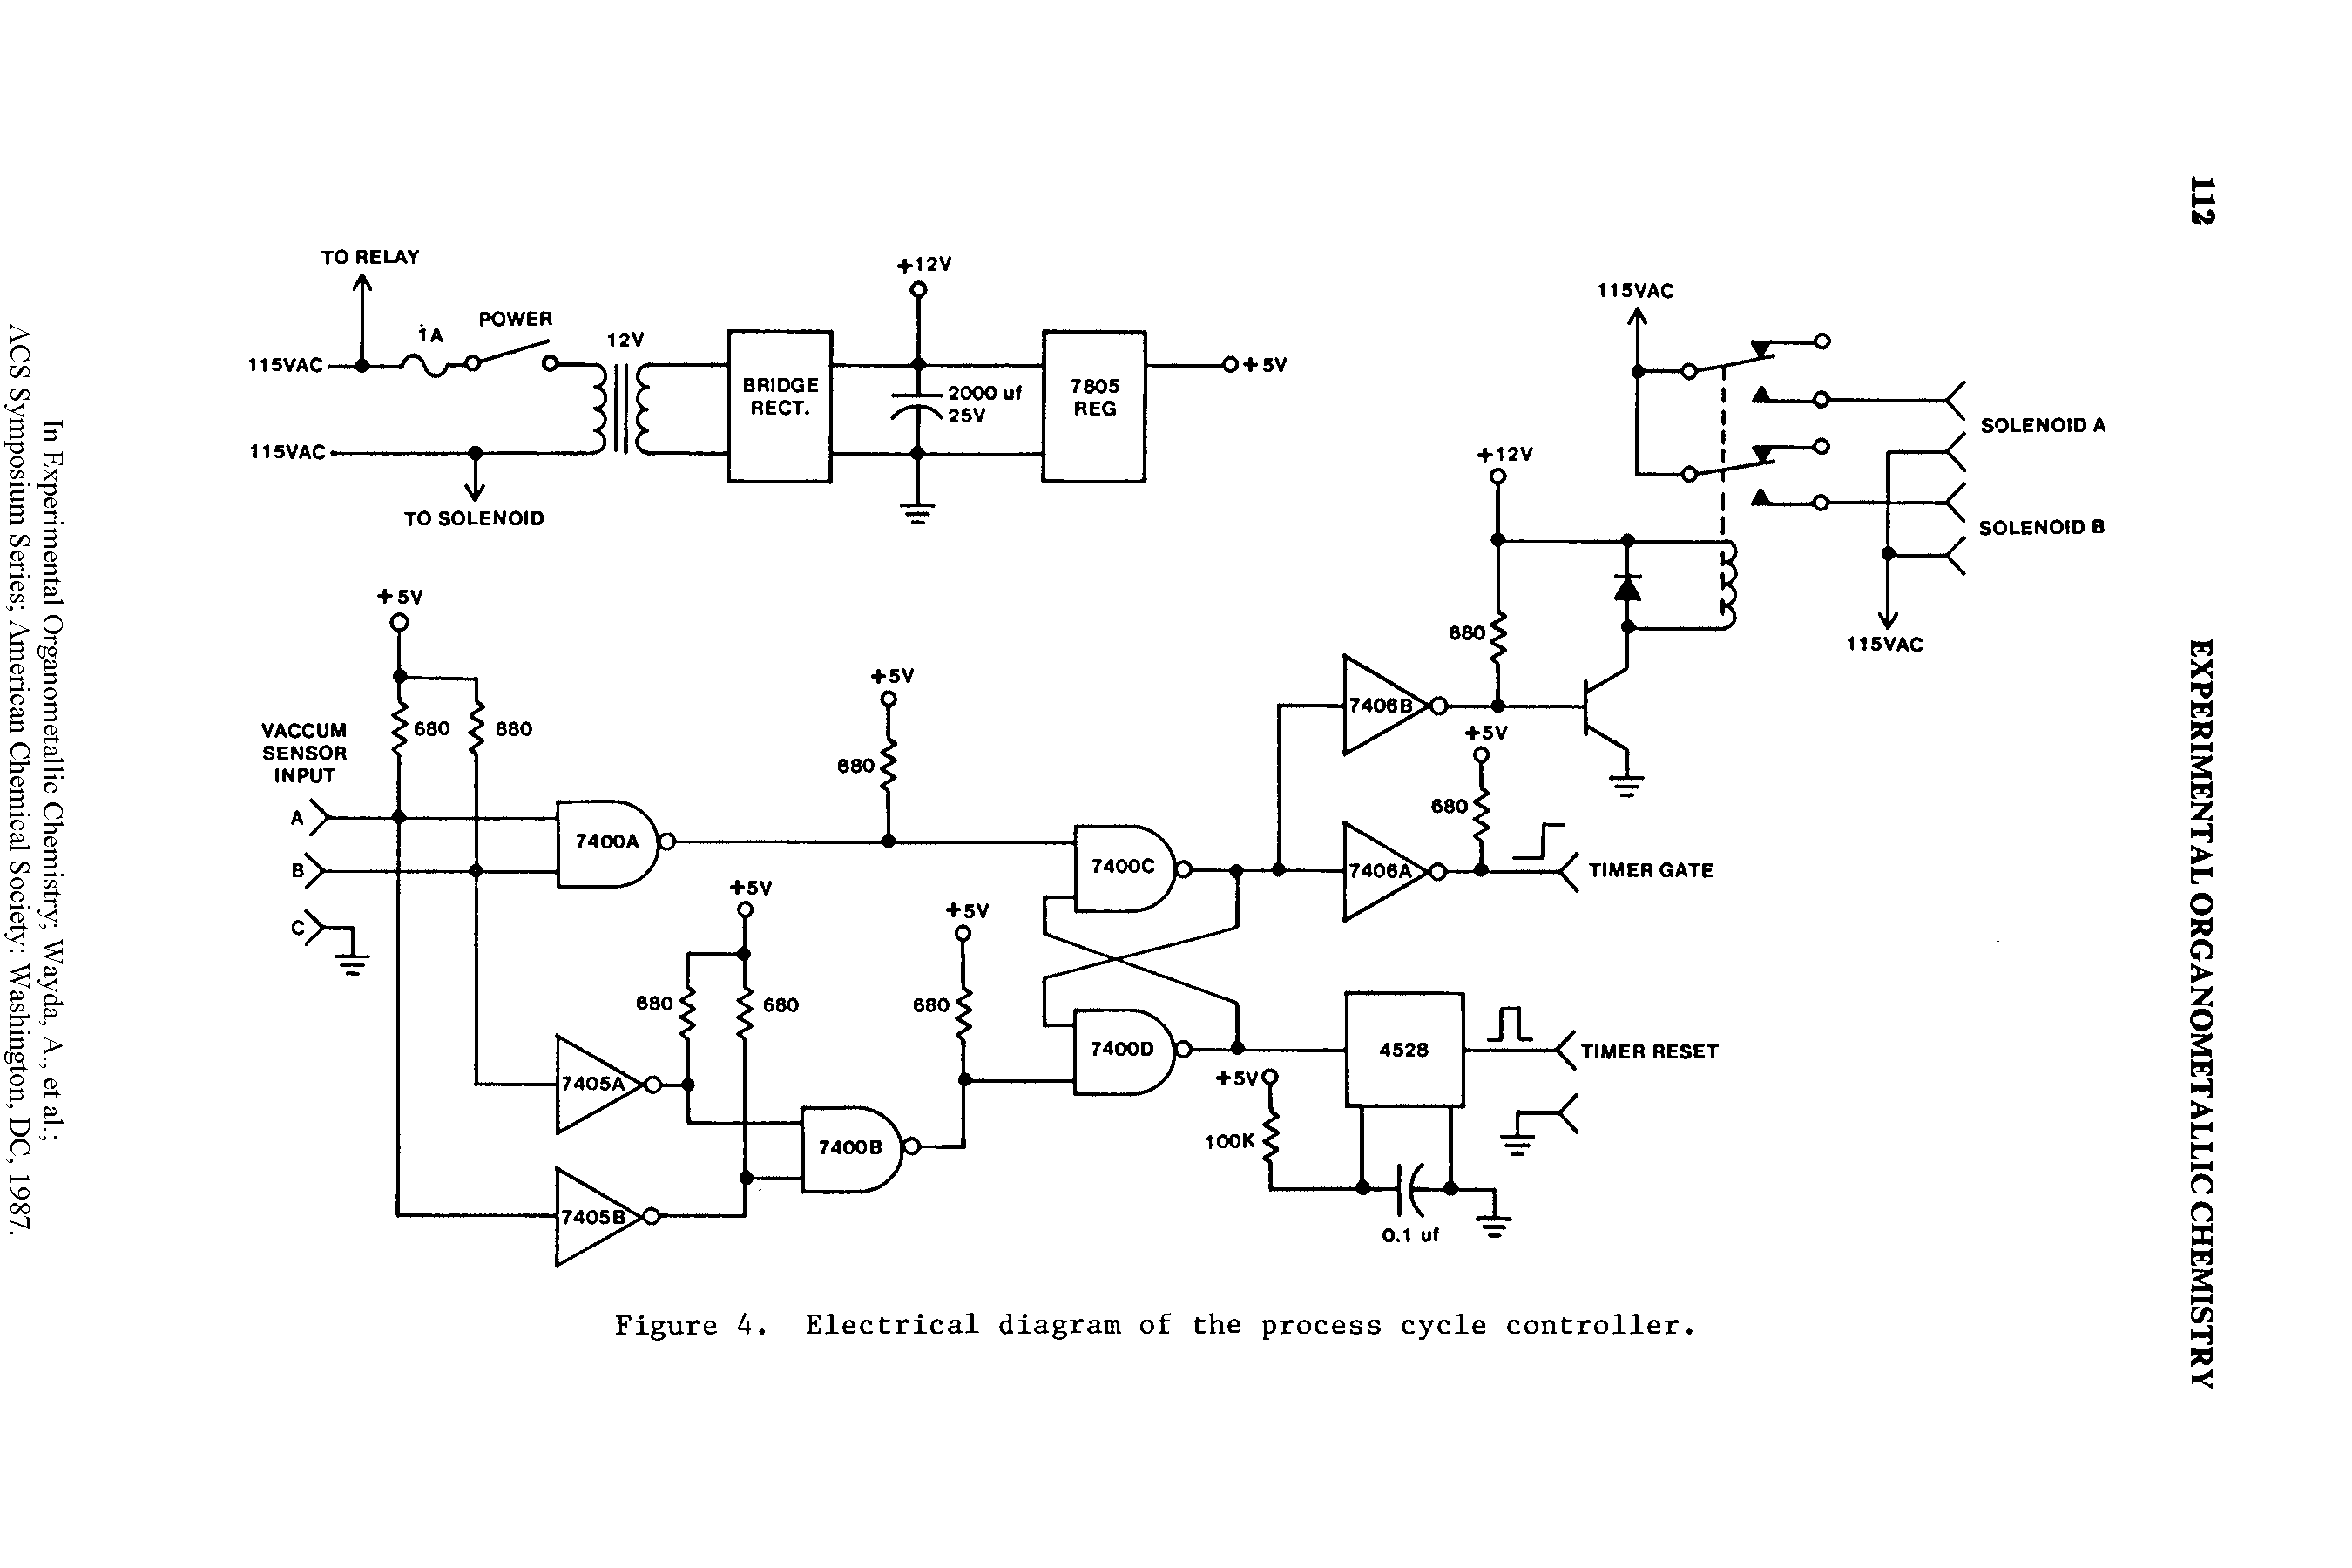 Figure 4. Electrical diagram of the process cycle controller.